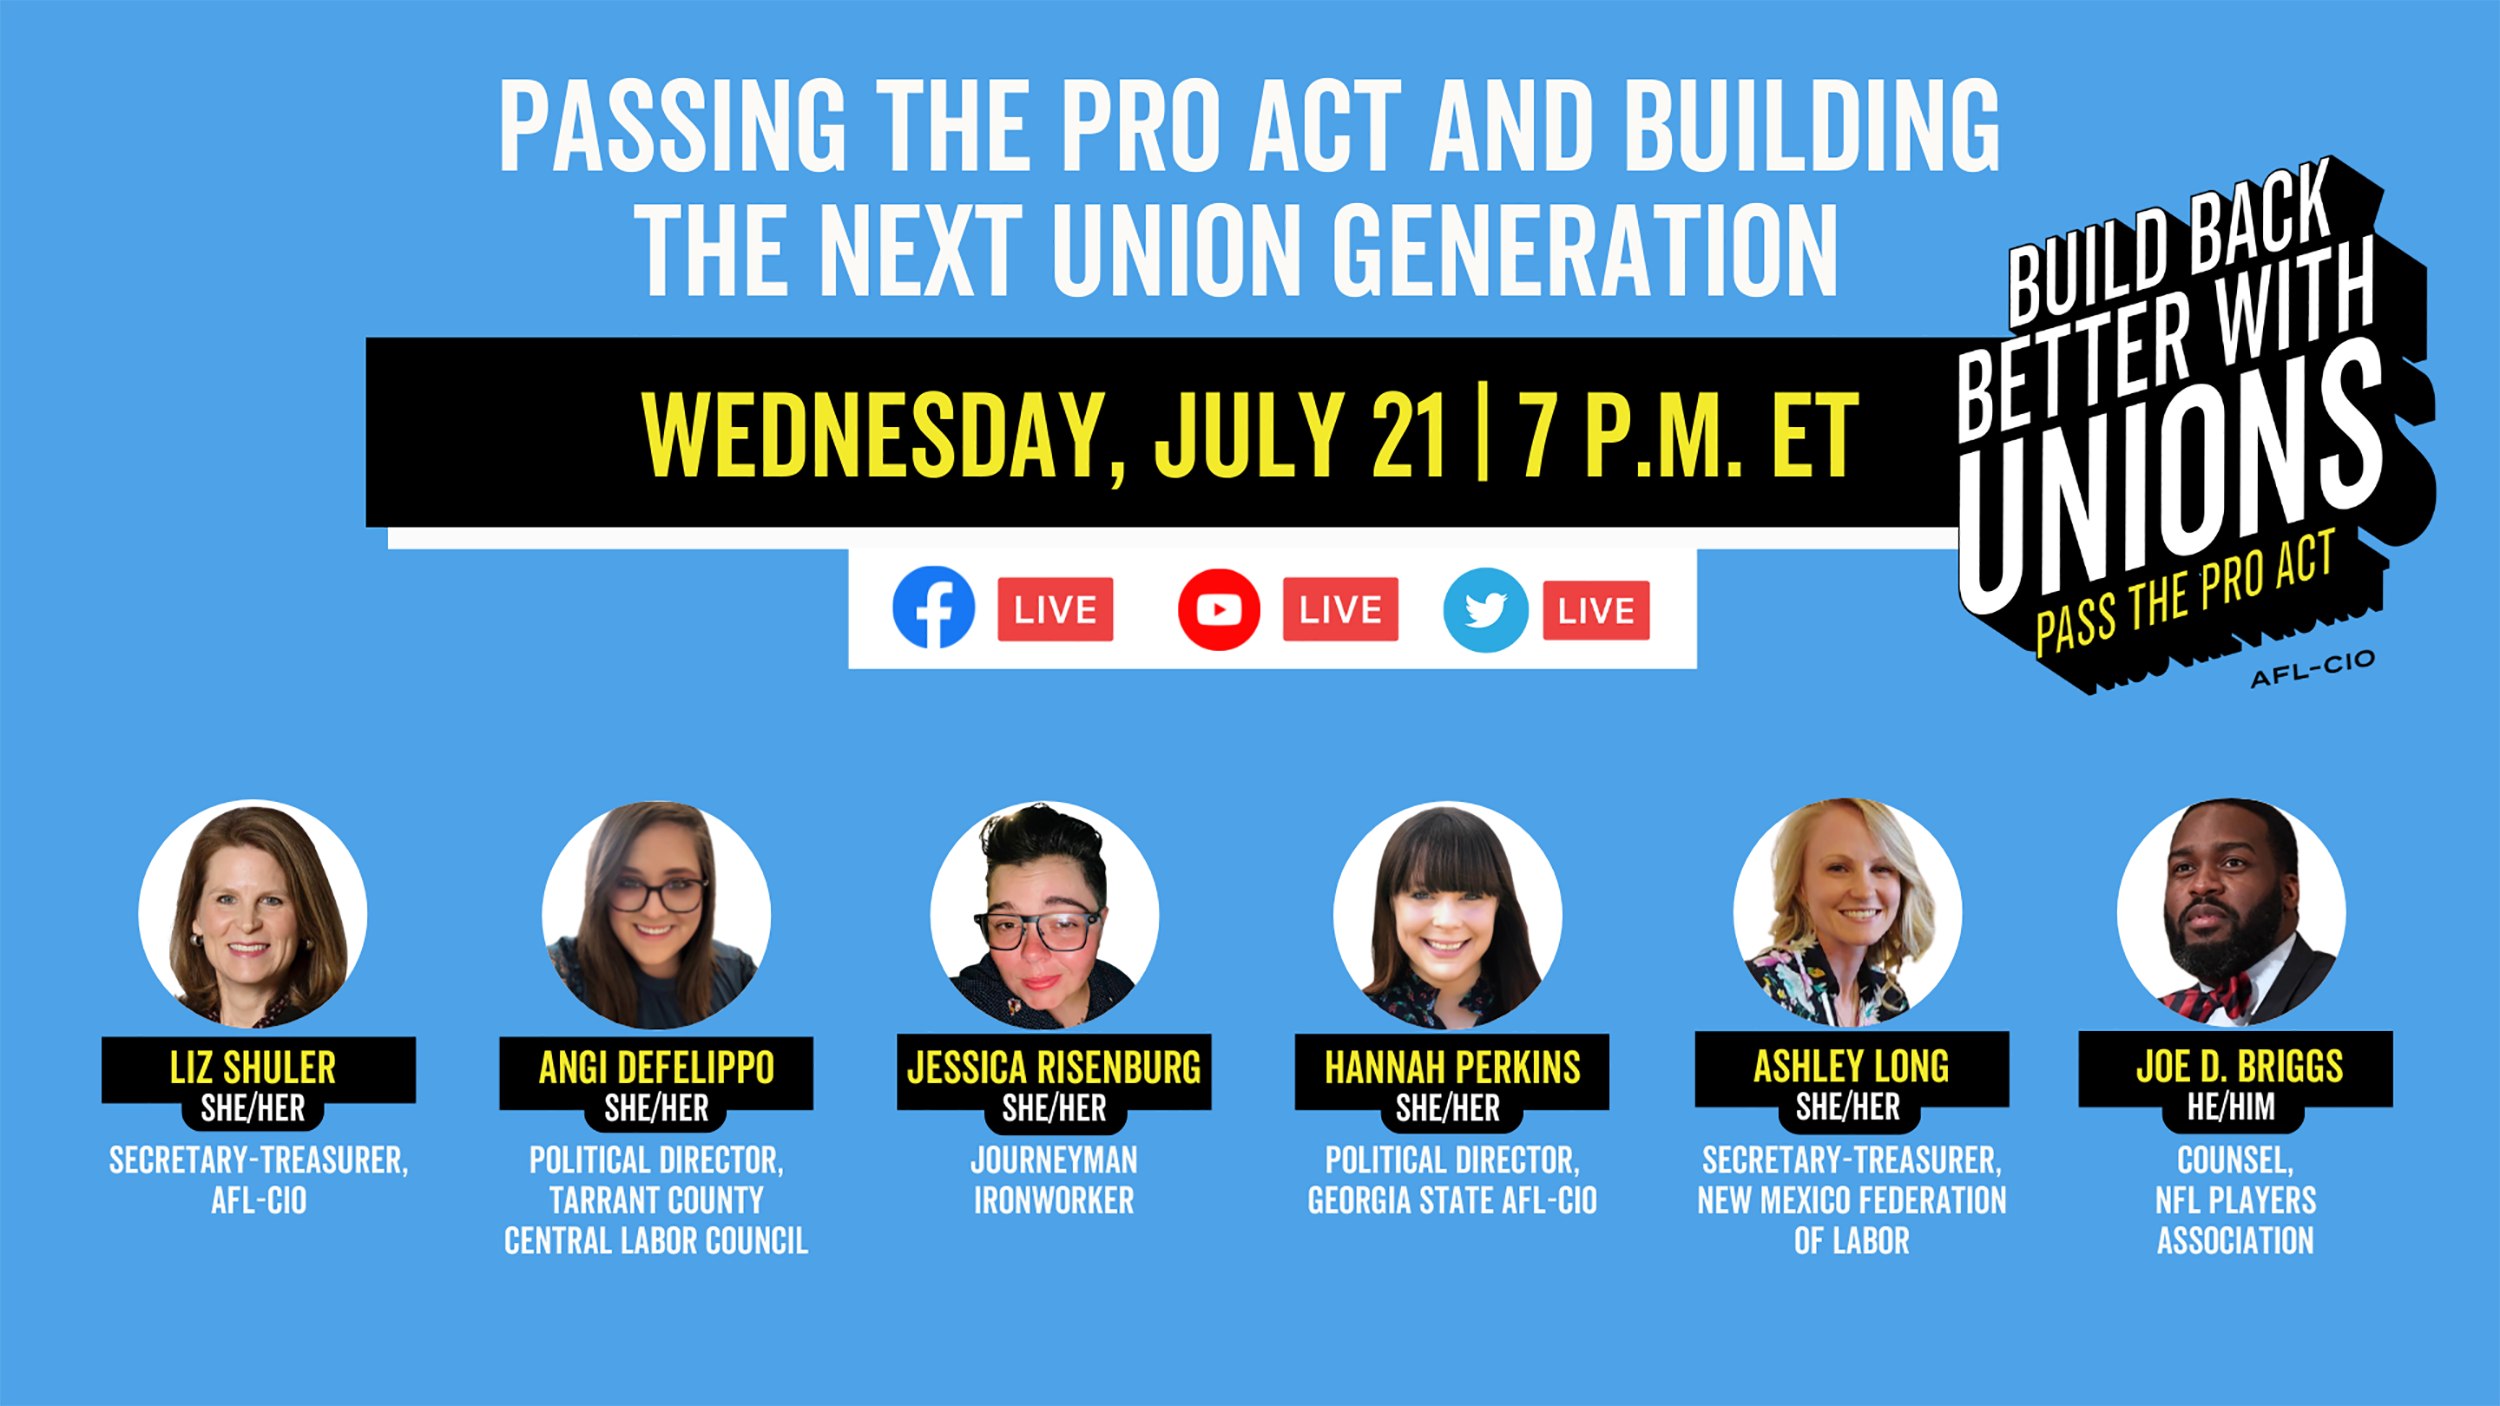 Passing the PRO Act and Building the Next Union Generation